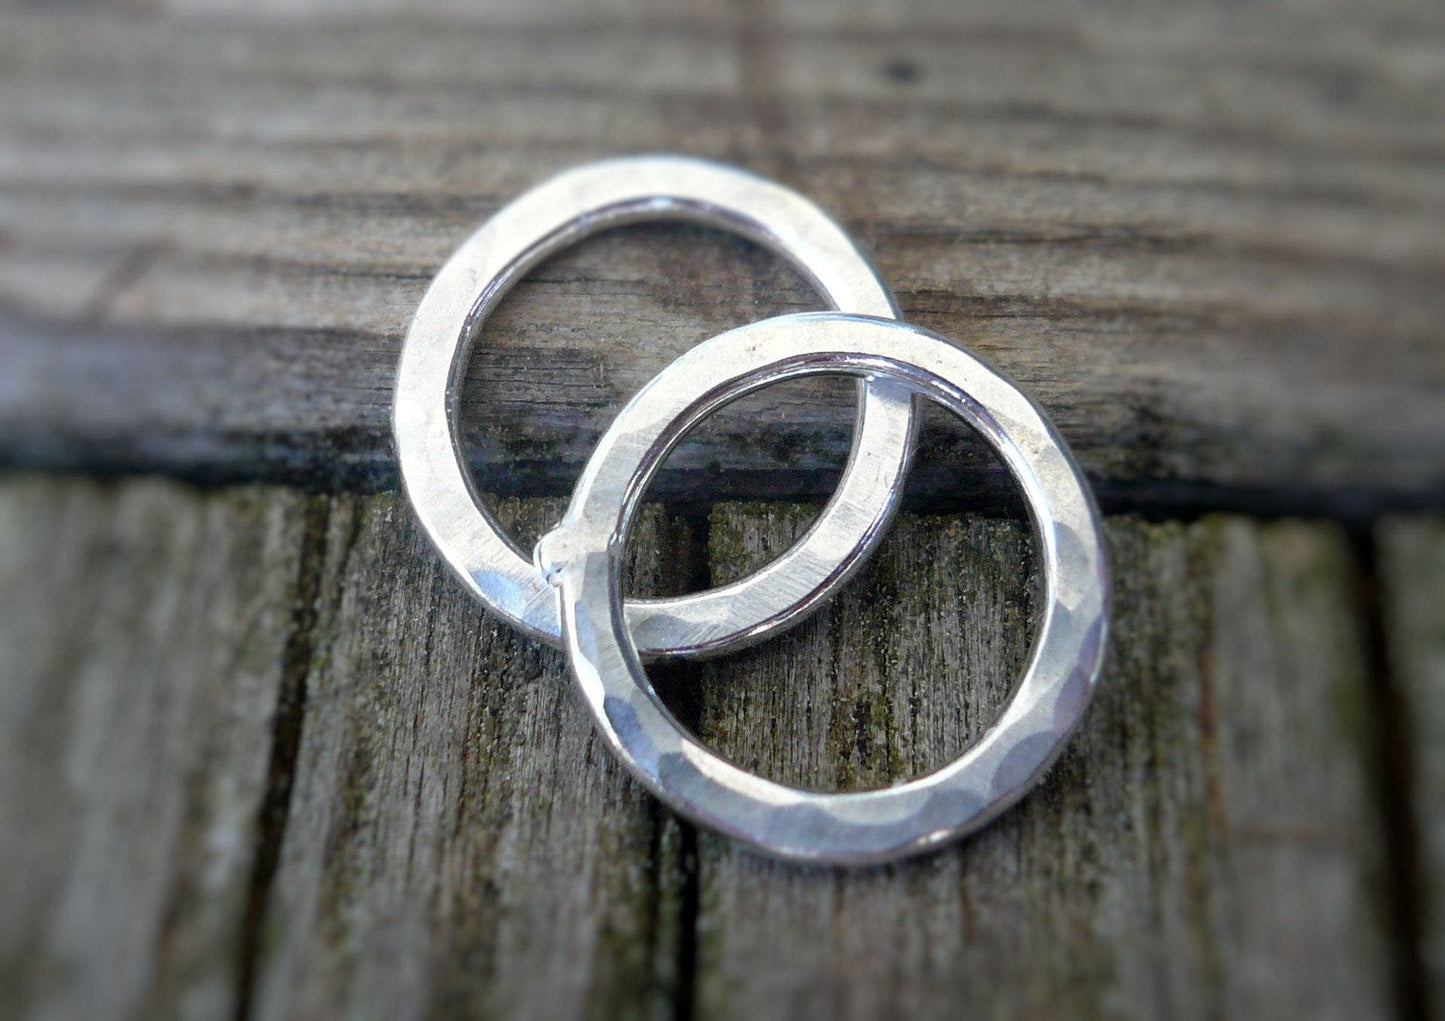 Pair of my Handforged, hammered Sterling Silver Loops - Handmade. Hand forged. 10mm.